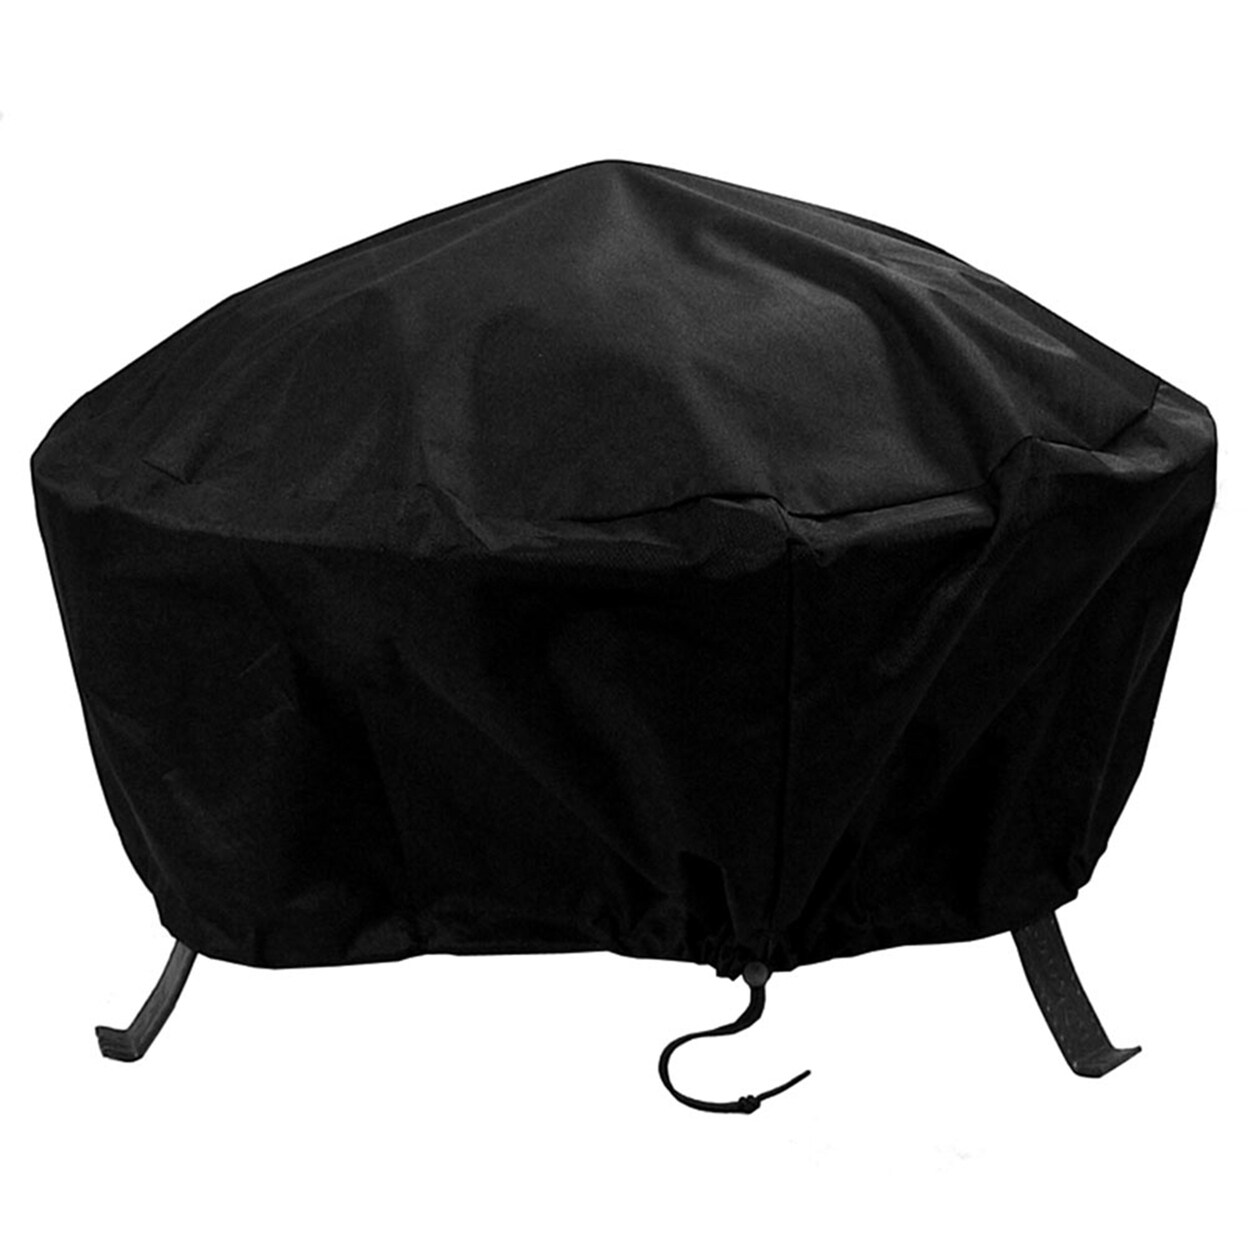 Sunnydaze   30 in Heavy-Duty PVC Round Outdoor Fire Pit Cover - Black